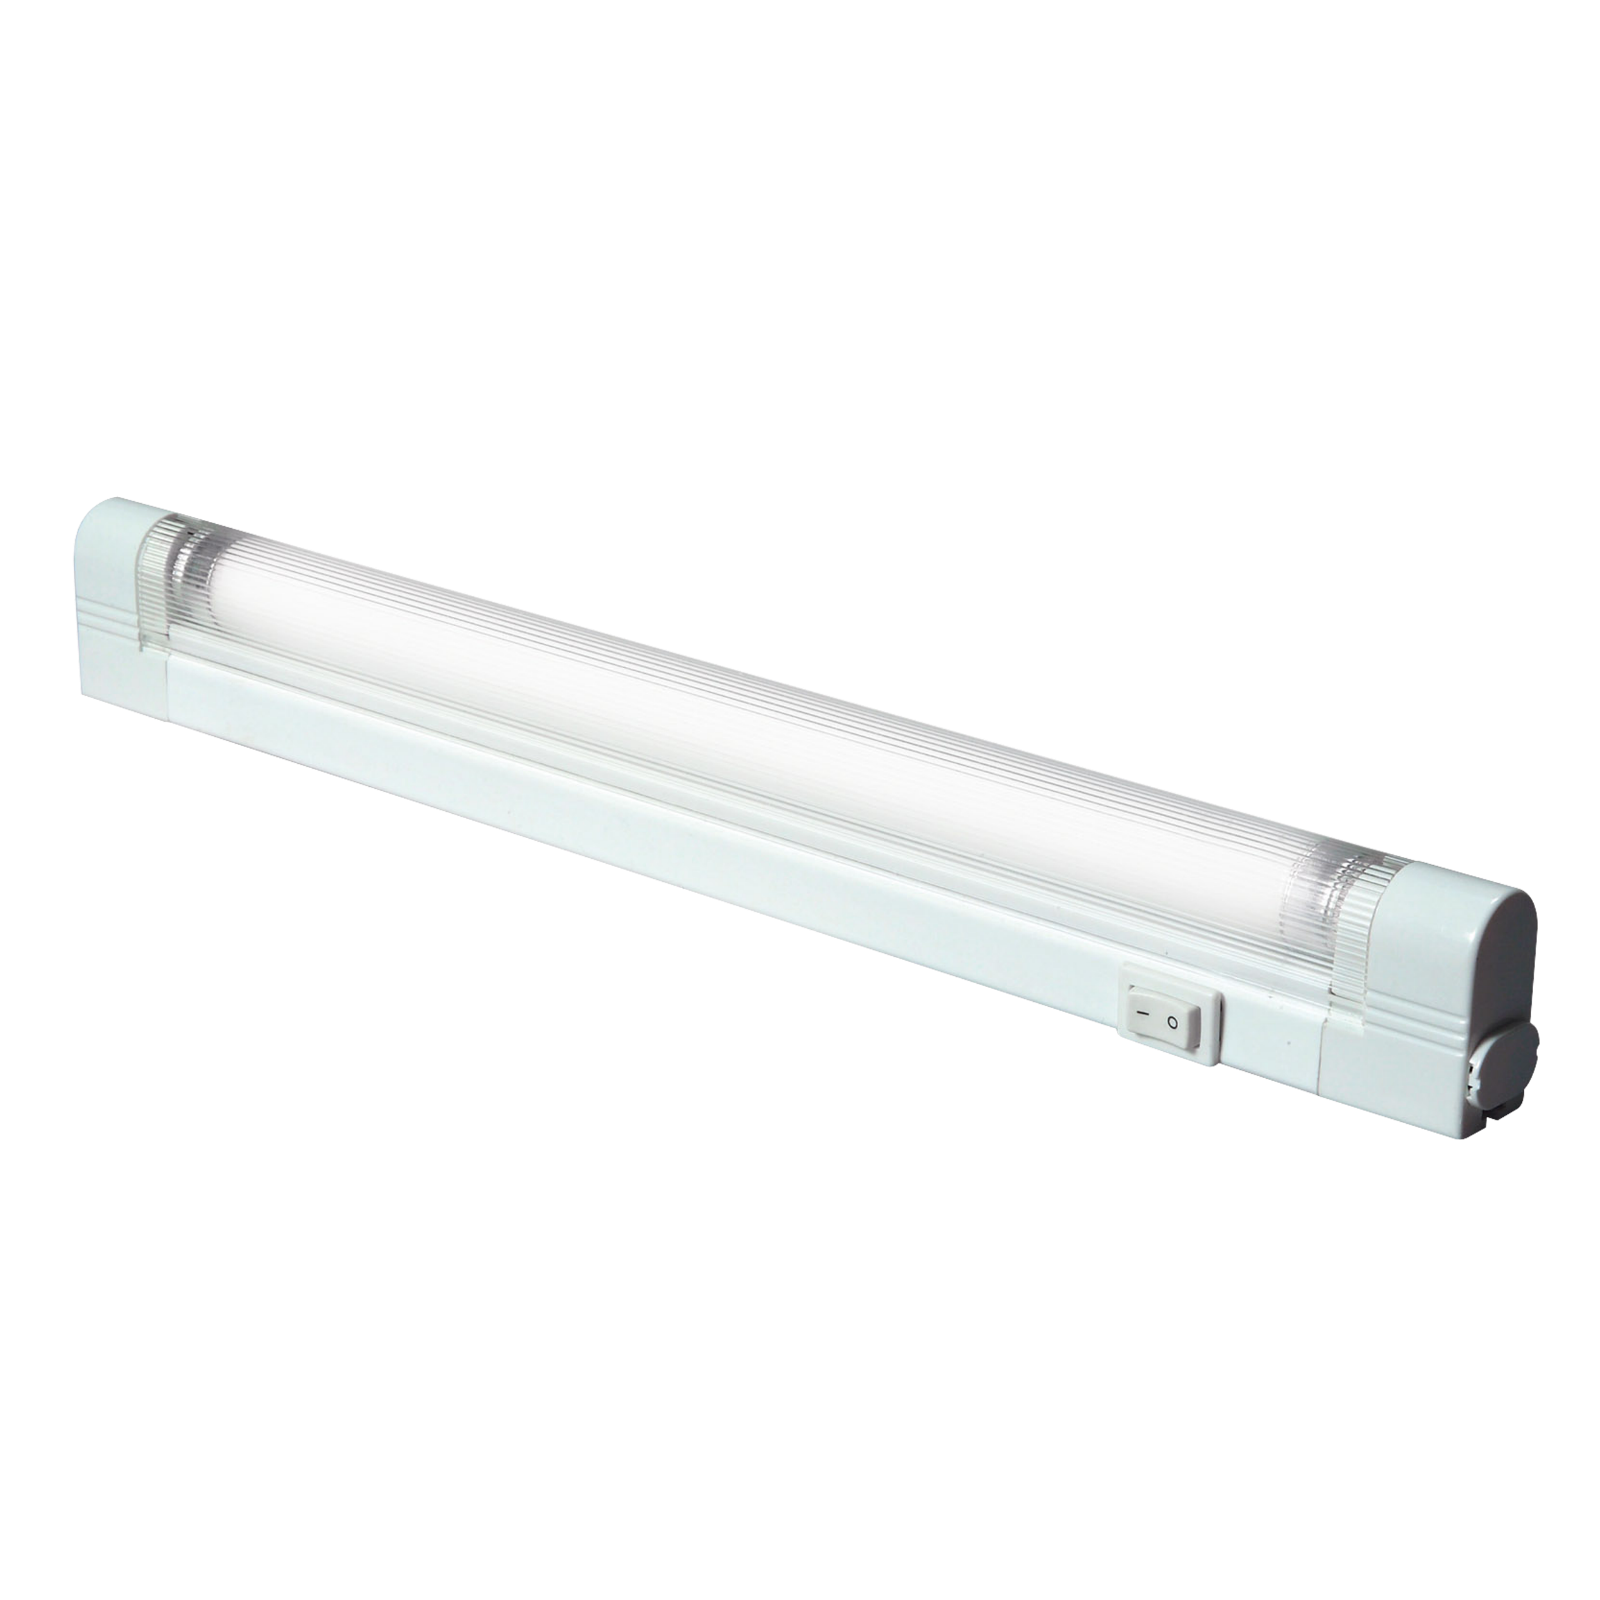 IP20 T5/G5 14W Slimline Linkable Fluorescent Fitting With Tube, Switch And Diffuser 3500K - T514 